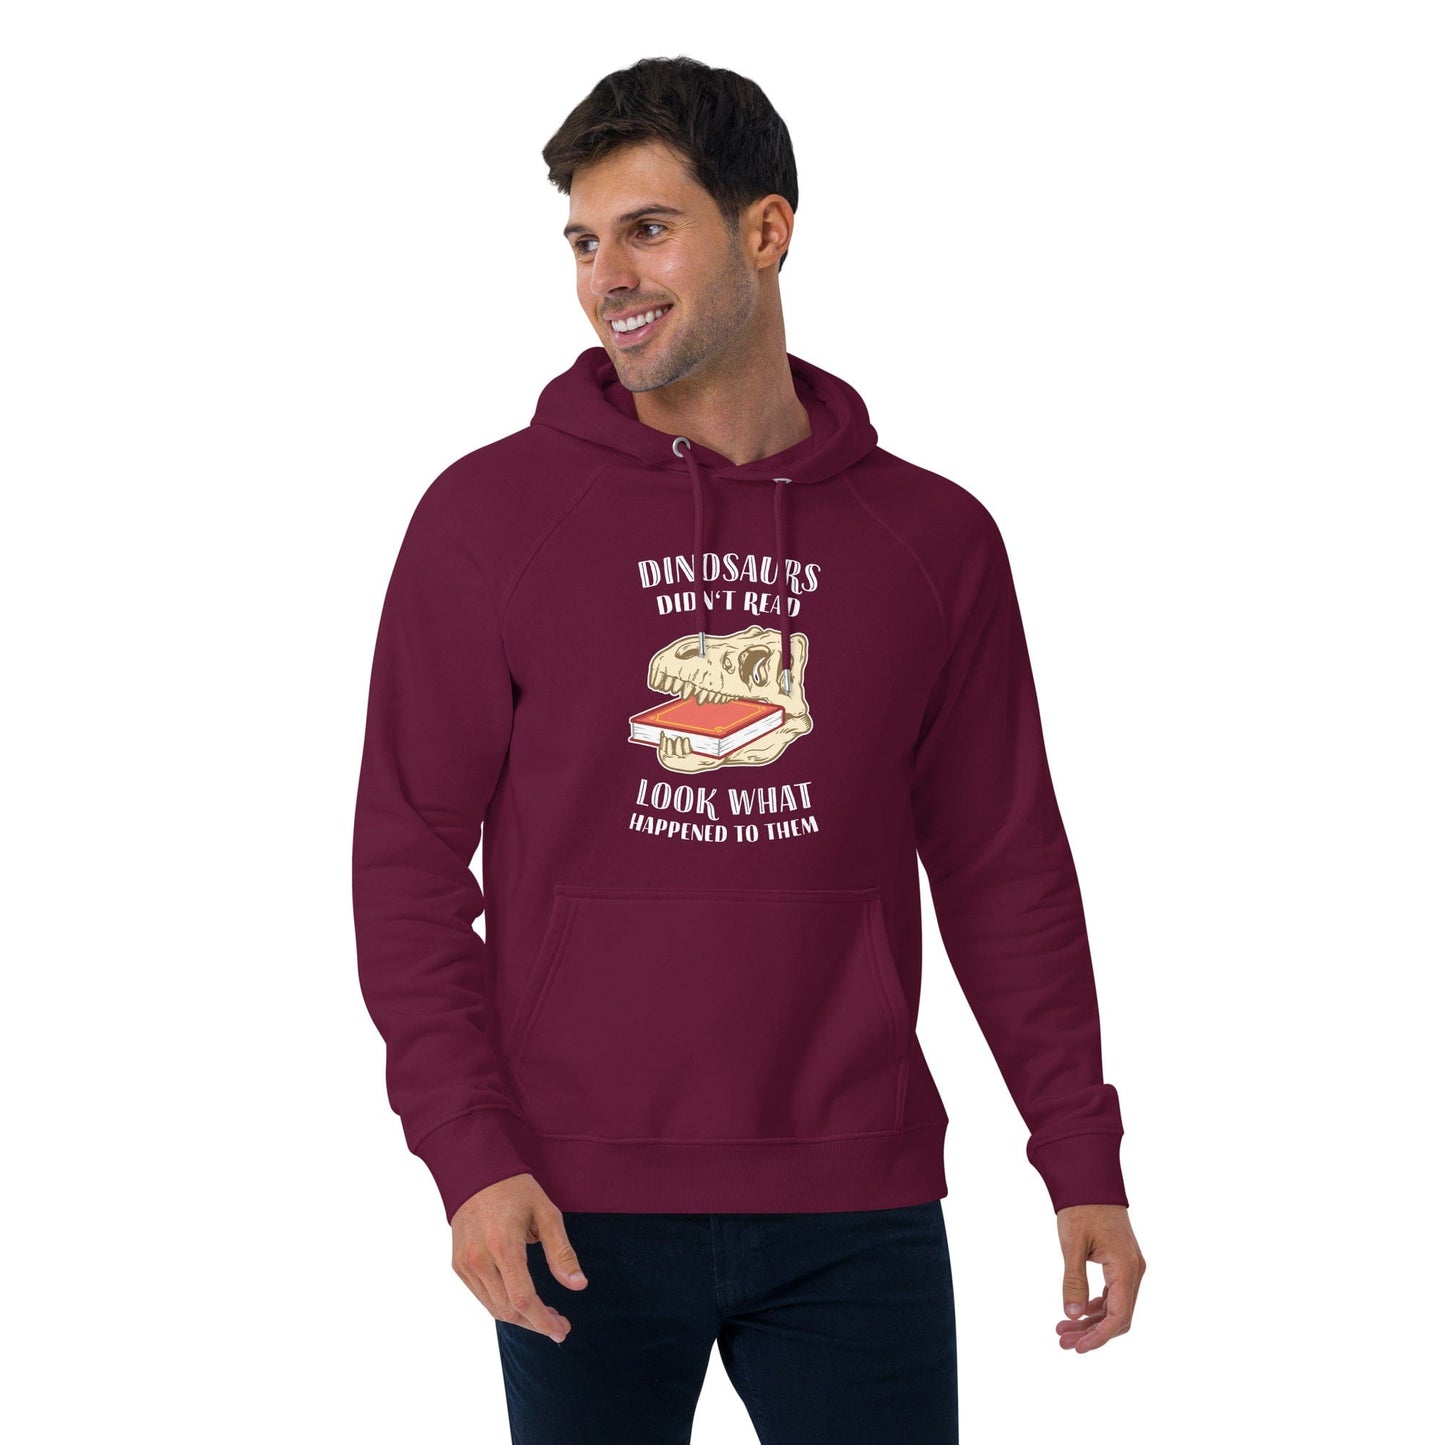 Dinosaurs Didn't Read - Look What Happened To Them - Eco Hoodie